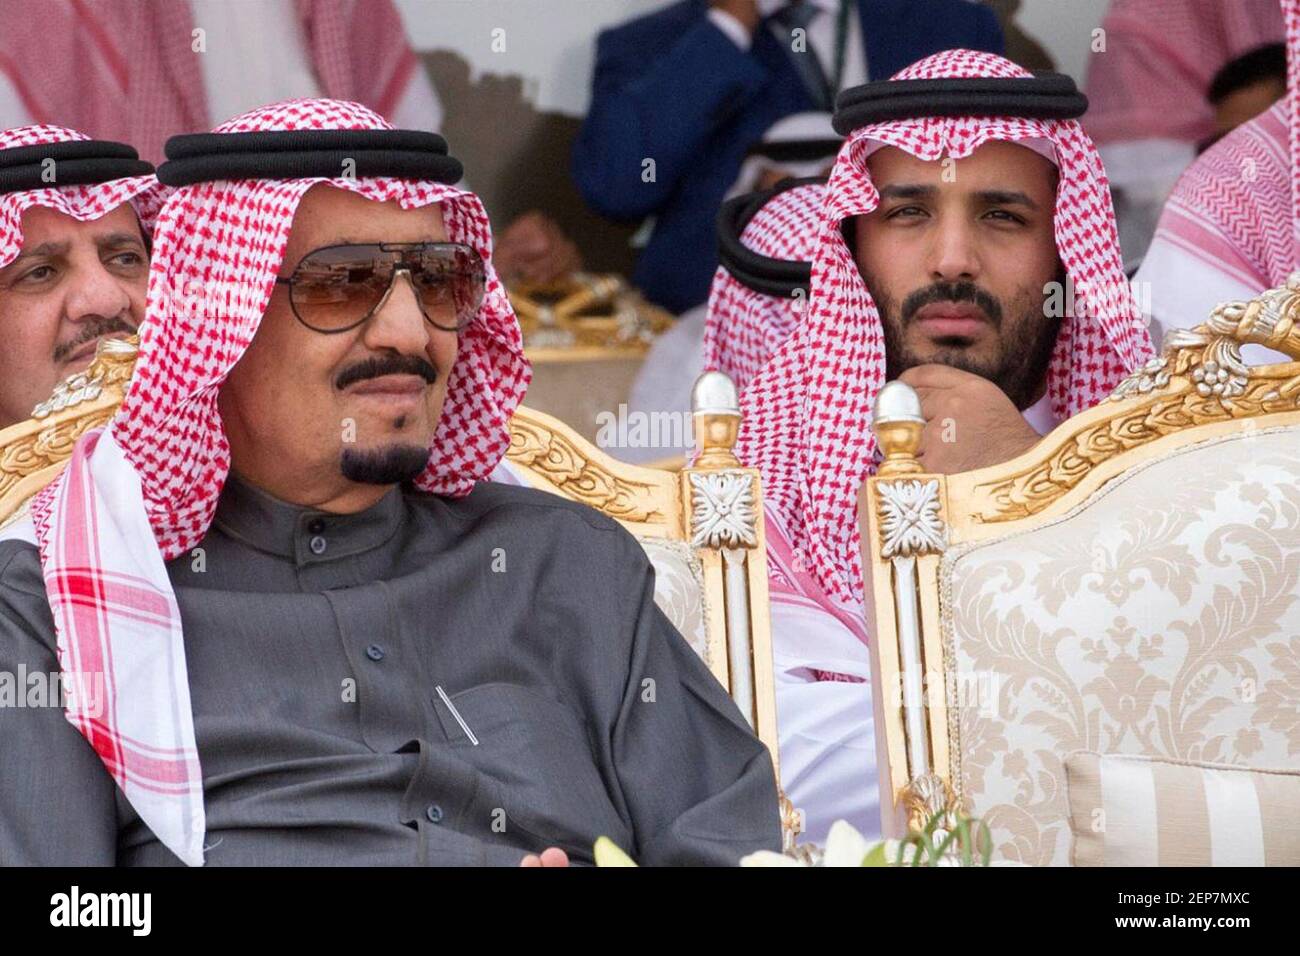 File photo dated March 11, 2016 L-R : King Salman Bin Abdul Aziz Al Saud, and his son Defense Minister Mohammed Bin Salman Al Saud attend military drill 'Northern Thunder' in Hafr Al Batin area, north of Saudi Arabia. A US intelligence report has found that Saudi Crown Prince Mohammed bin Salman approved the murder of exiled Saudi journalist Jamal Khashoggi in 2018. The report released by the Biden administration says the prince approved a plan to either 'capture or kill' Khashoggi. Photo by Balkis Press/ABACAPRESS. Credit: Abaca Press/Alamy Live News Stock Photo